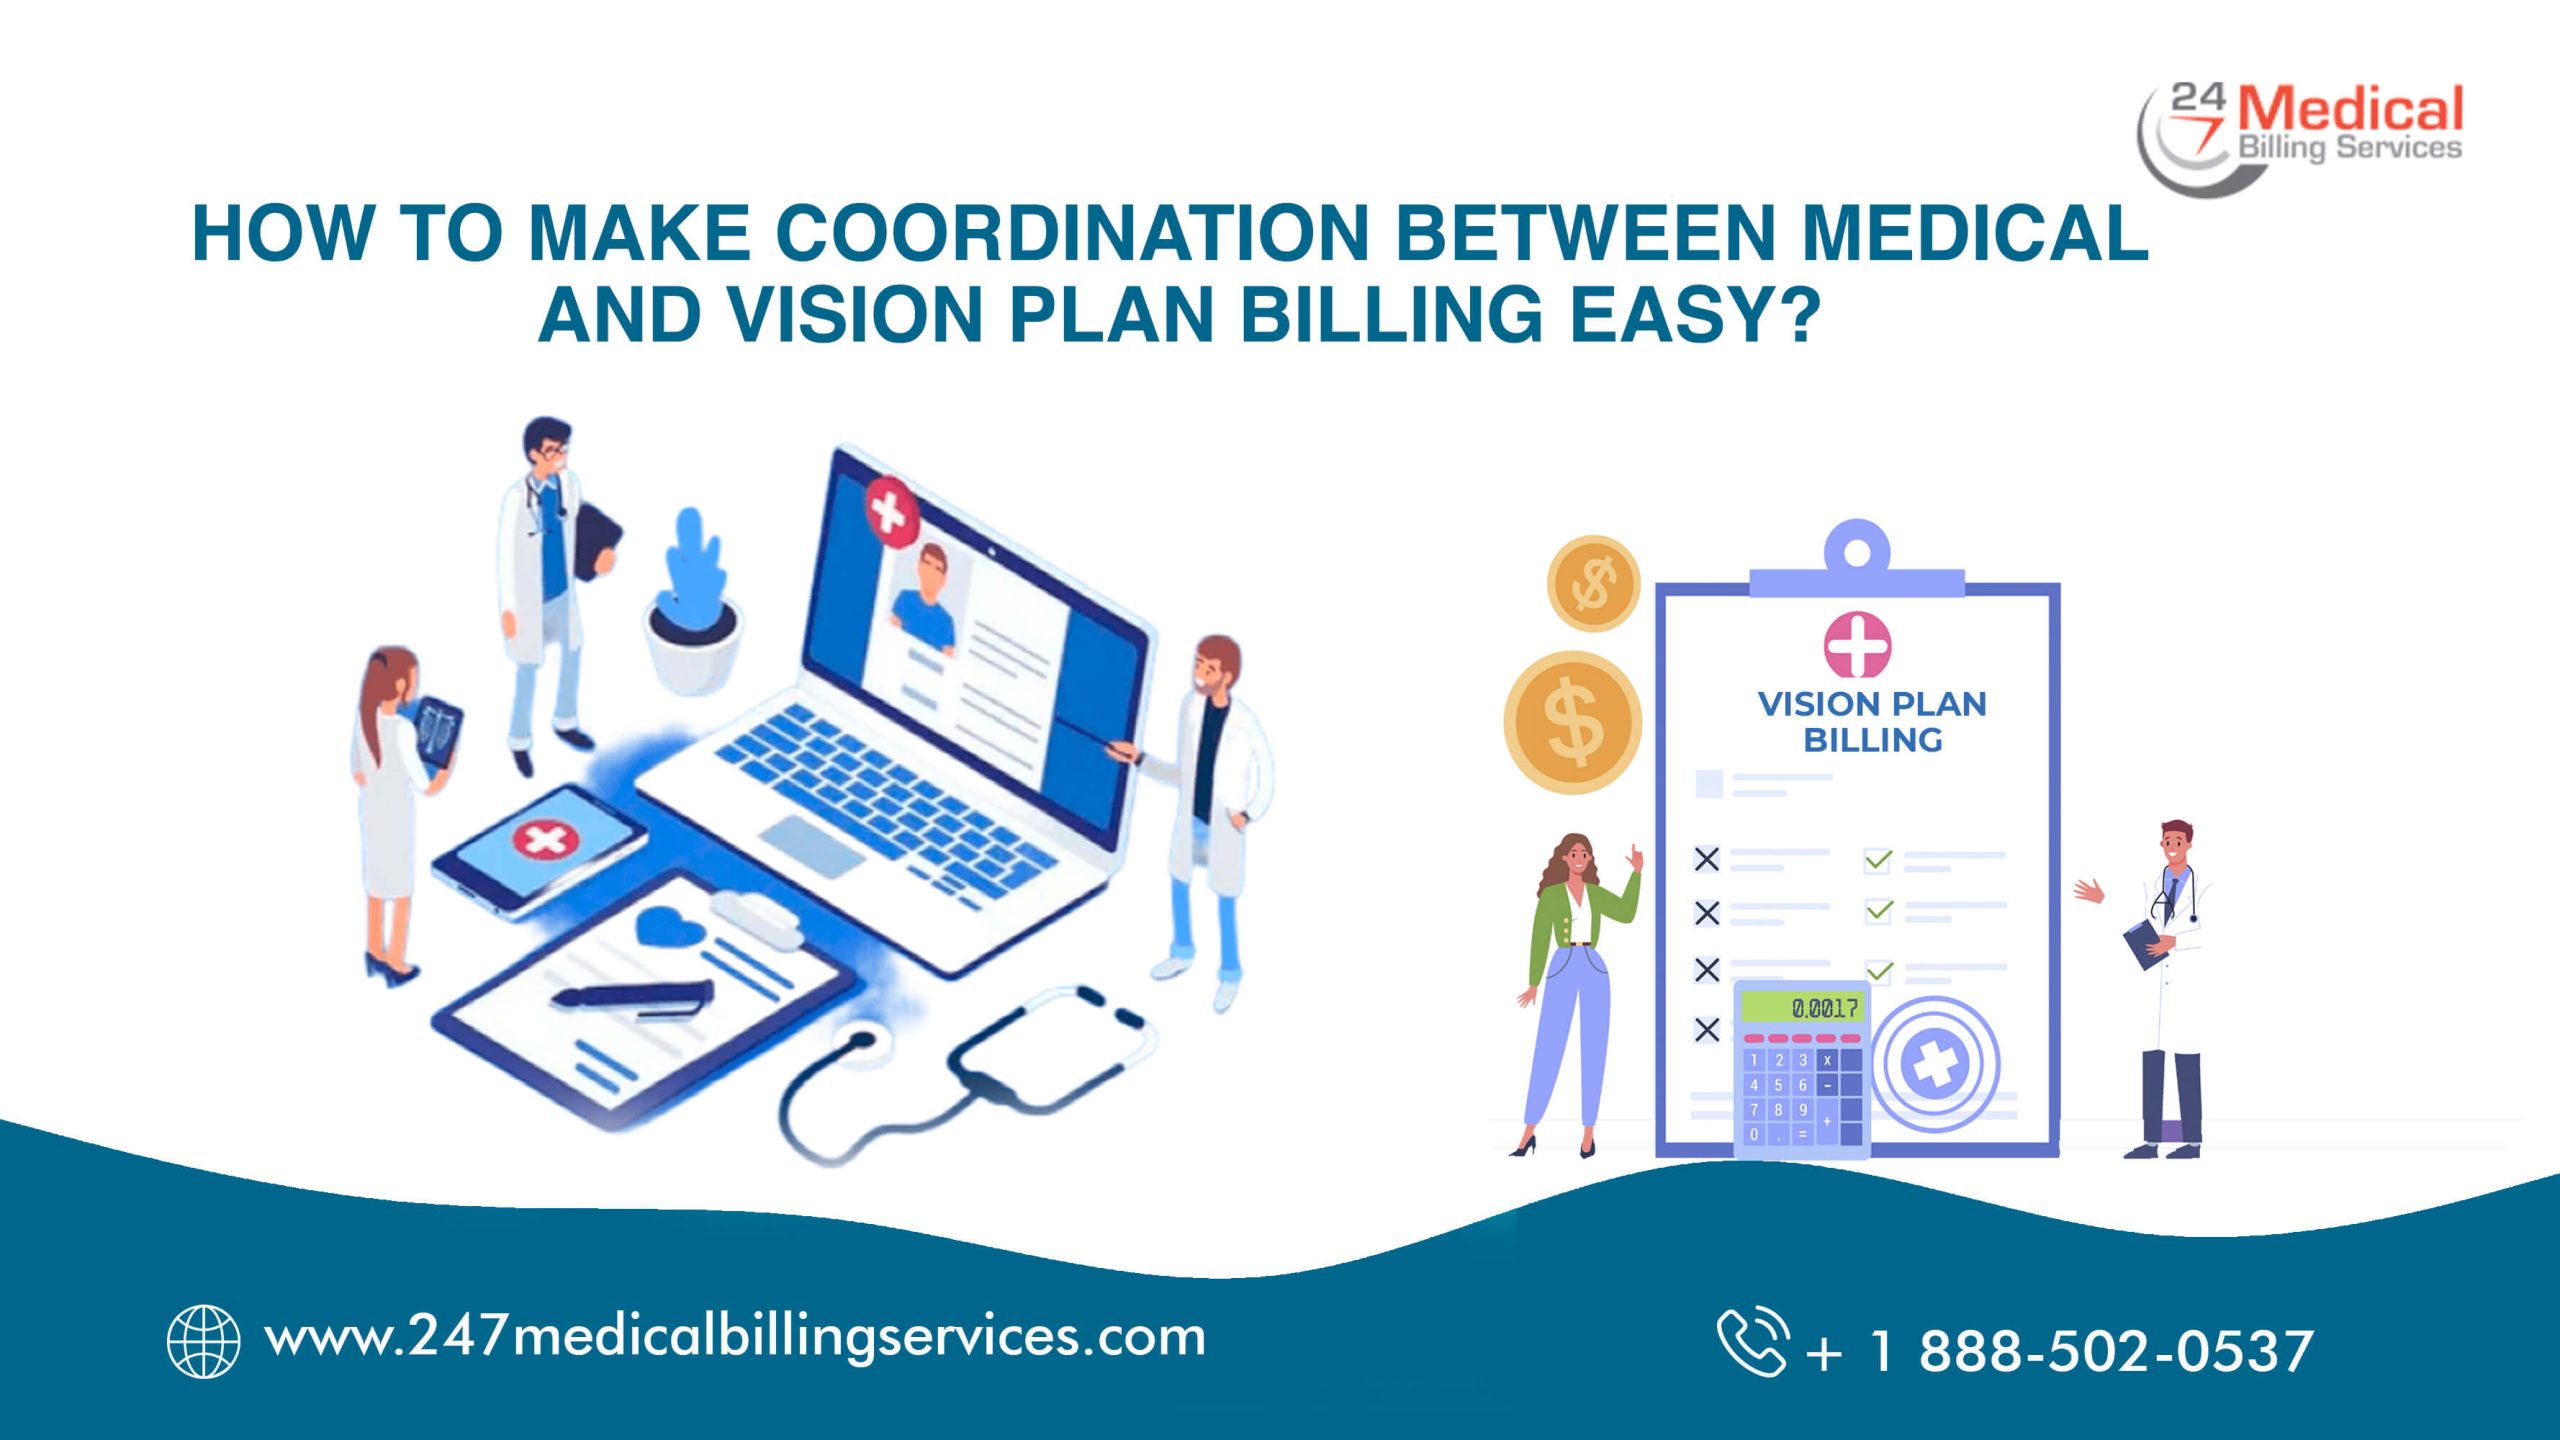 Coordinating between medical and vision plan billing can be a complex process, but there are steps you can take to make it easier.